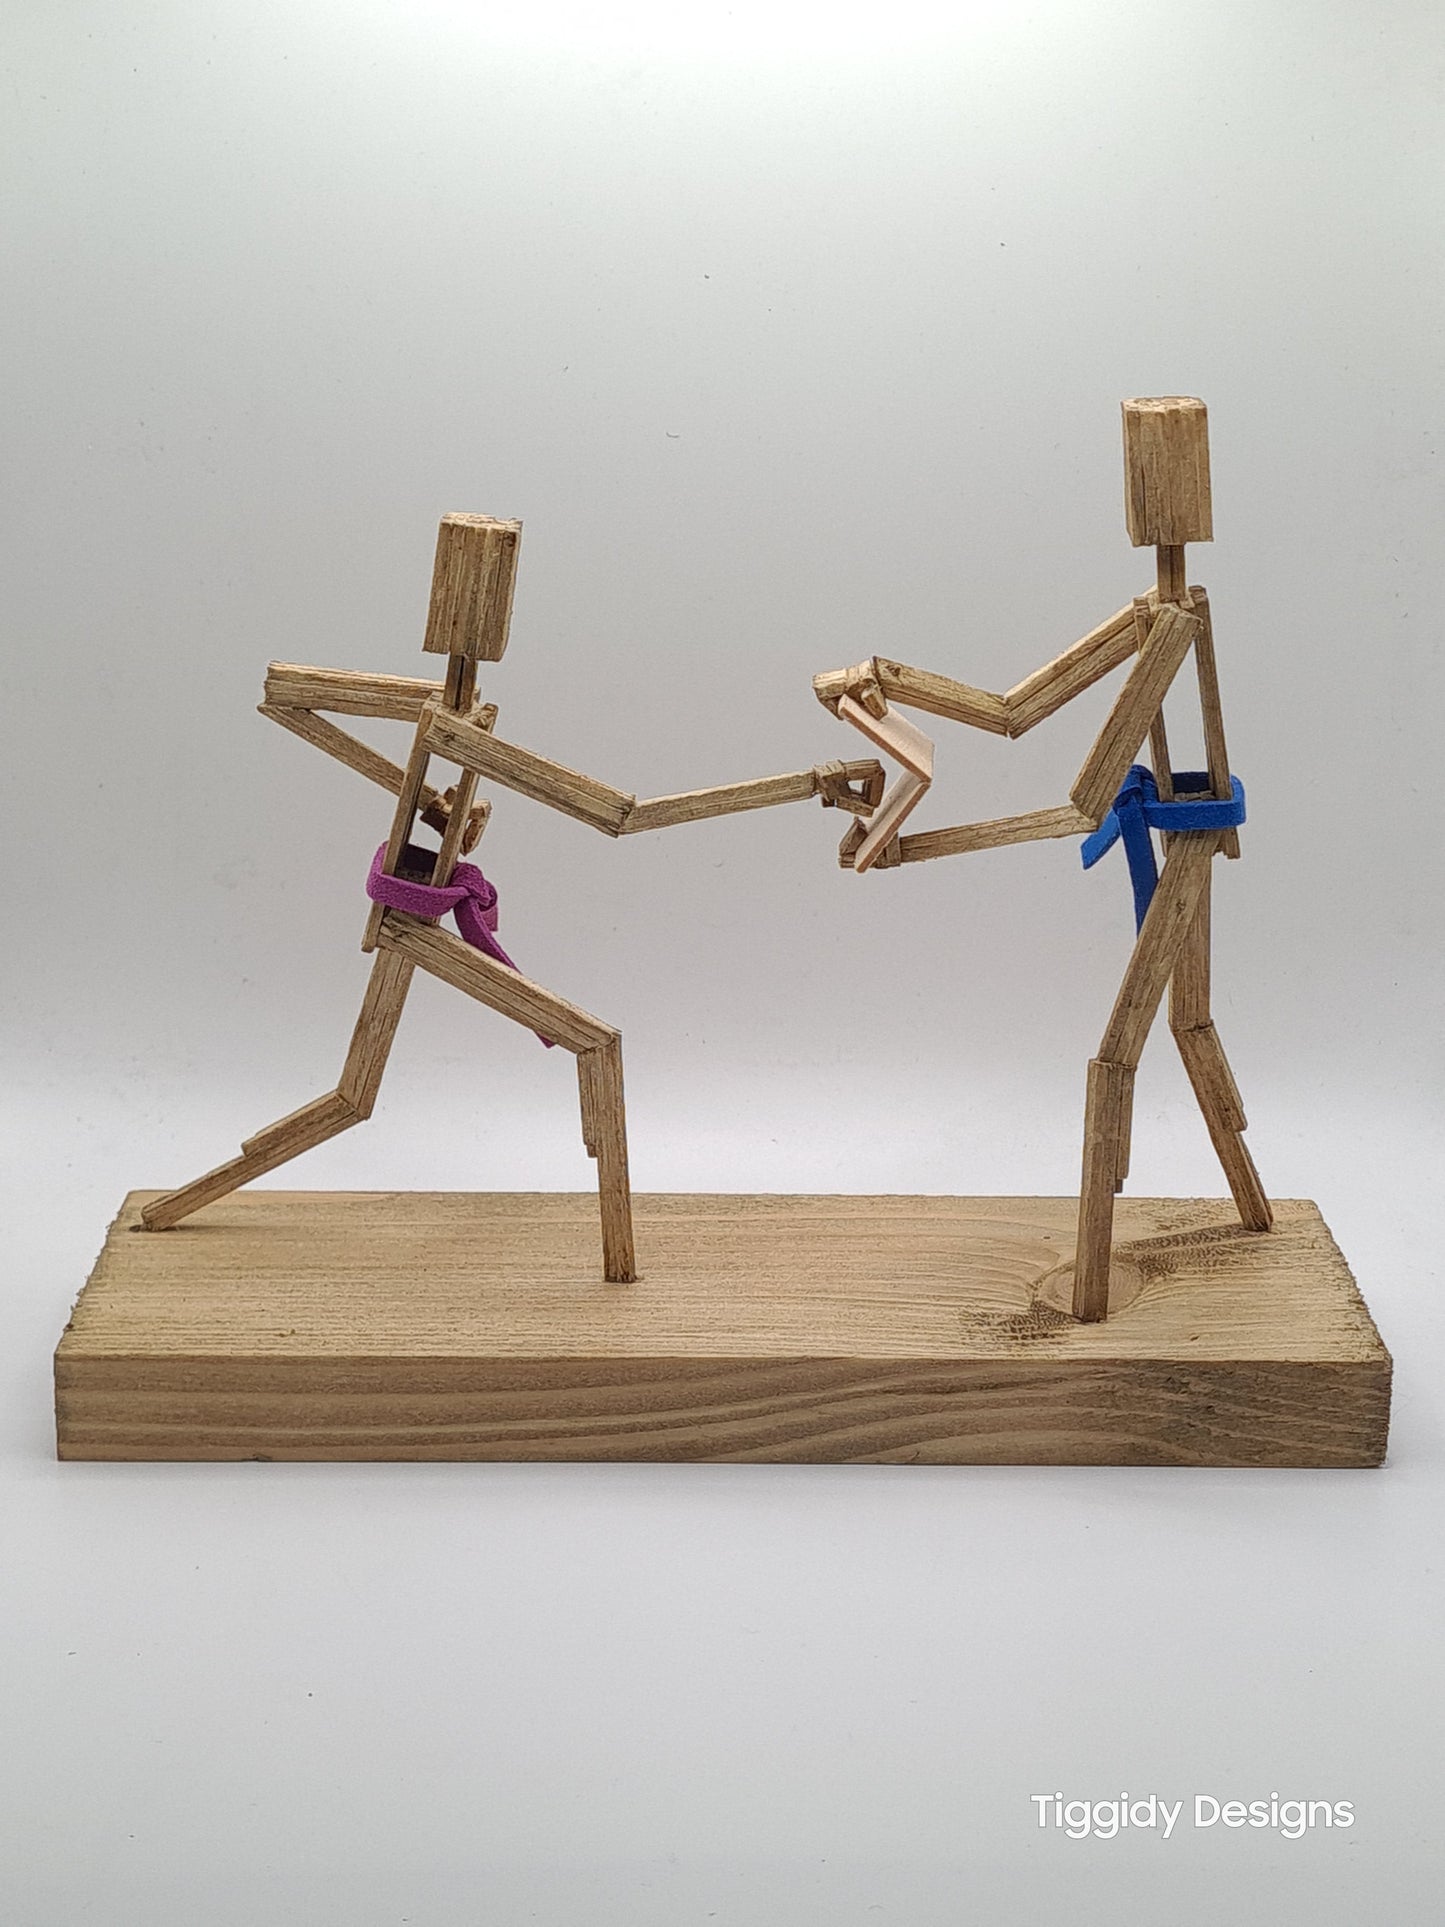 Breaking Board - The Puncher - Handcrafted Wooden Matchstick Figures - Gifts, Ornaments and Decor By Tiggidy Designs